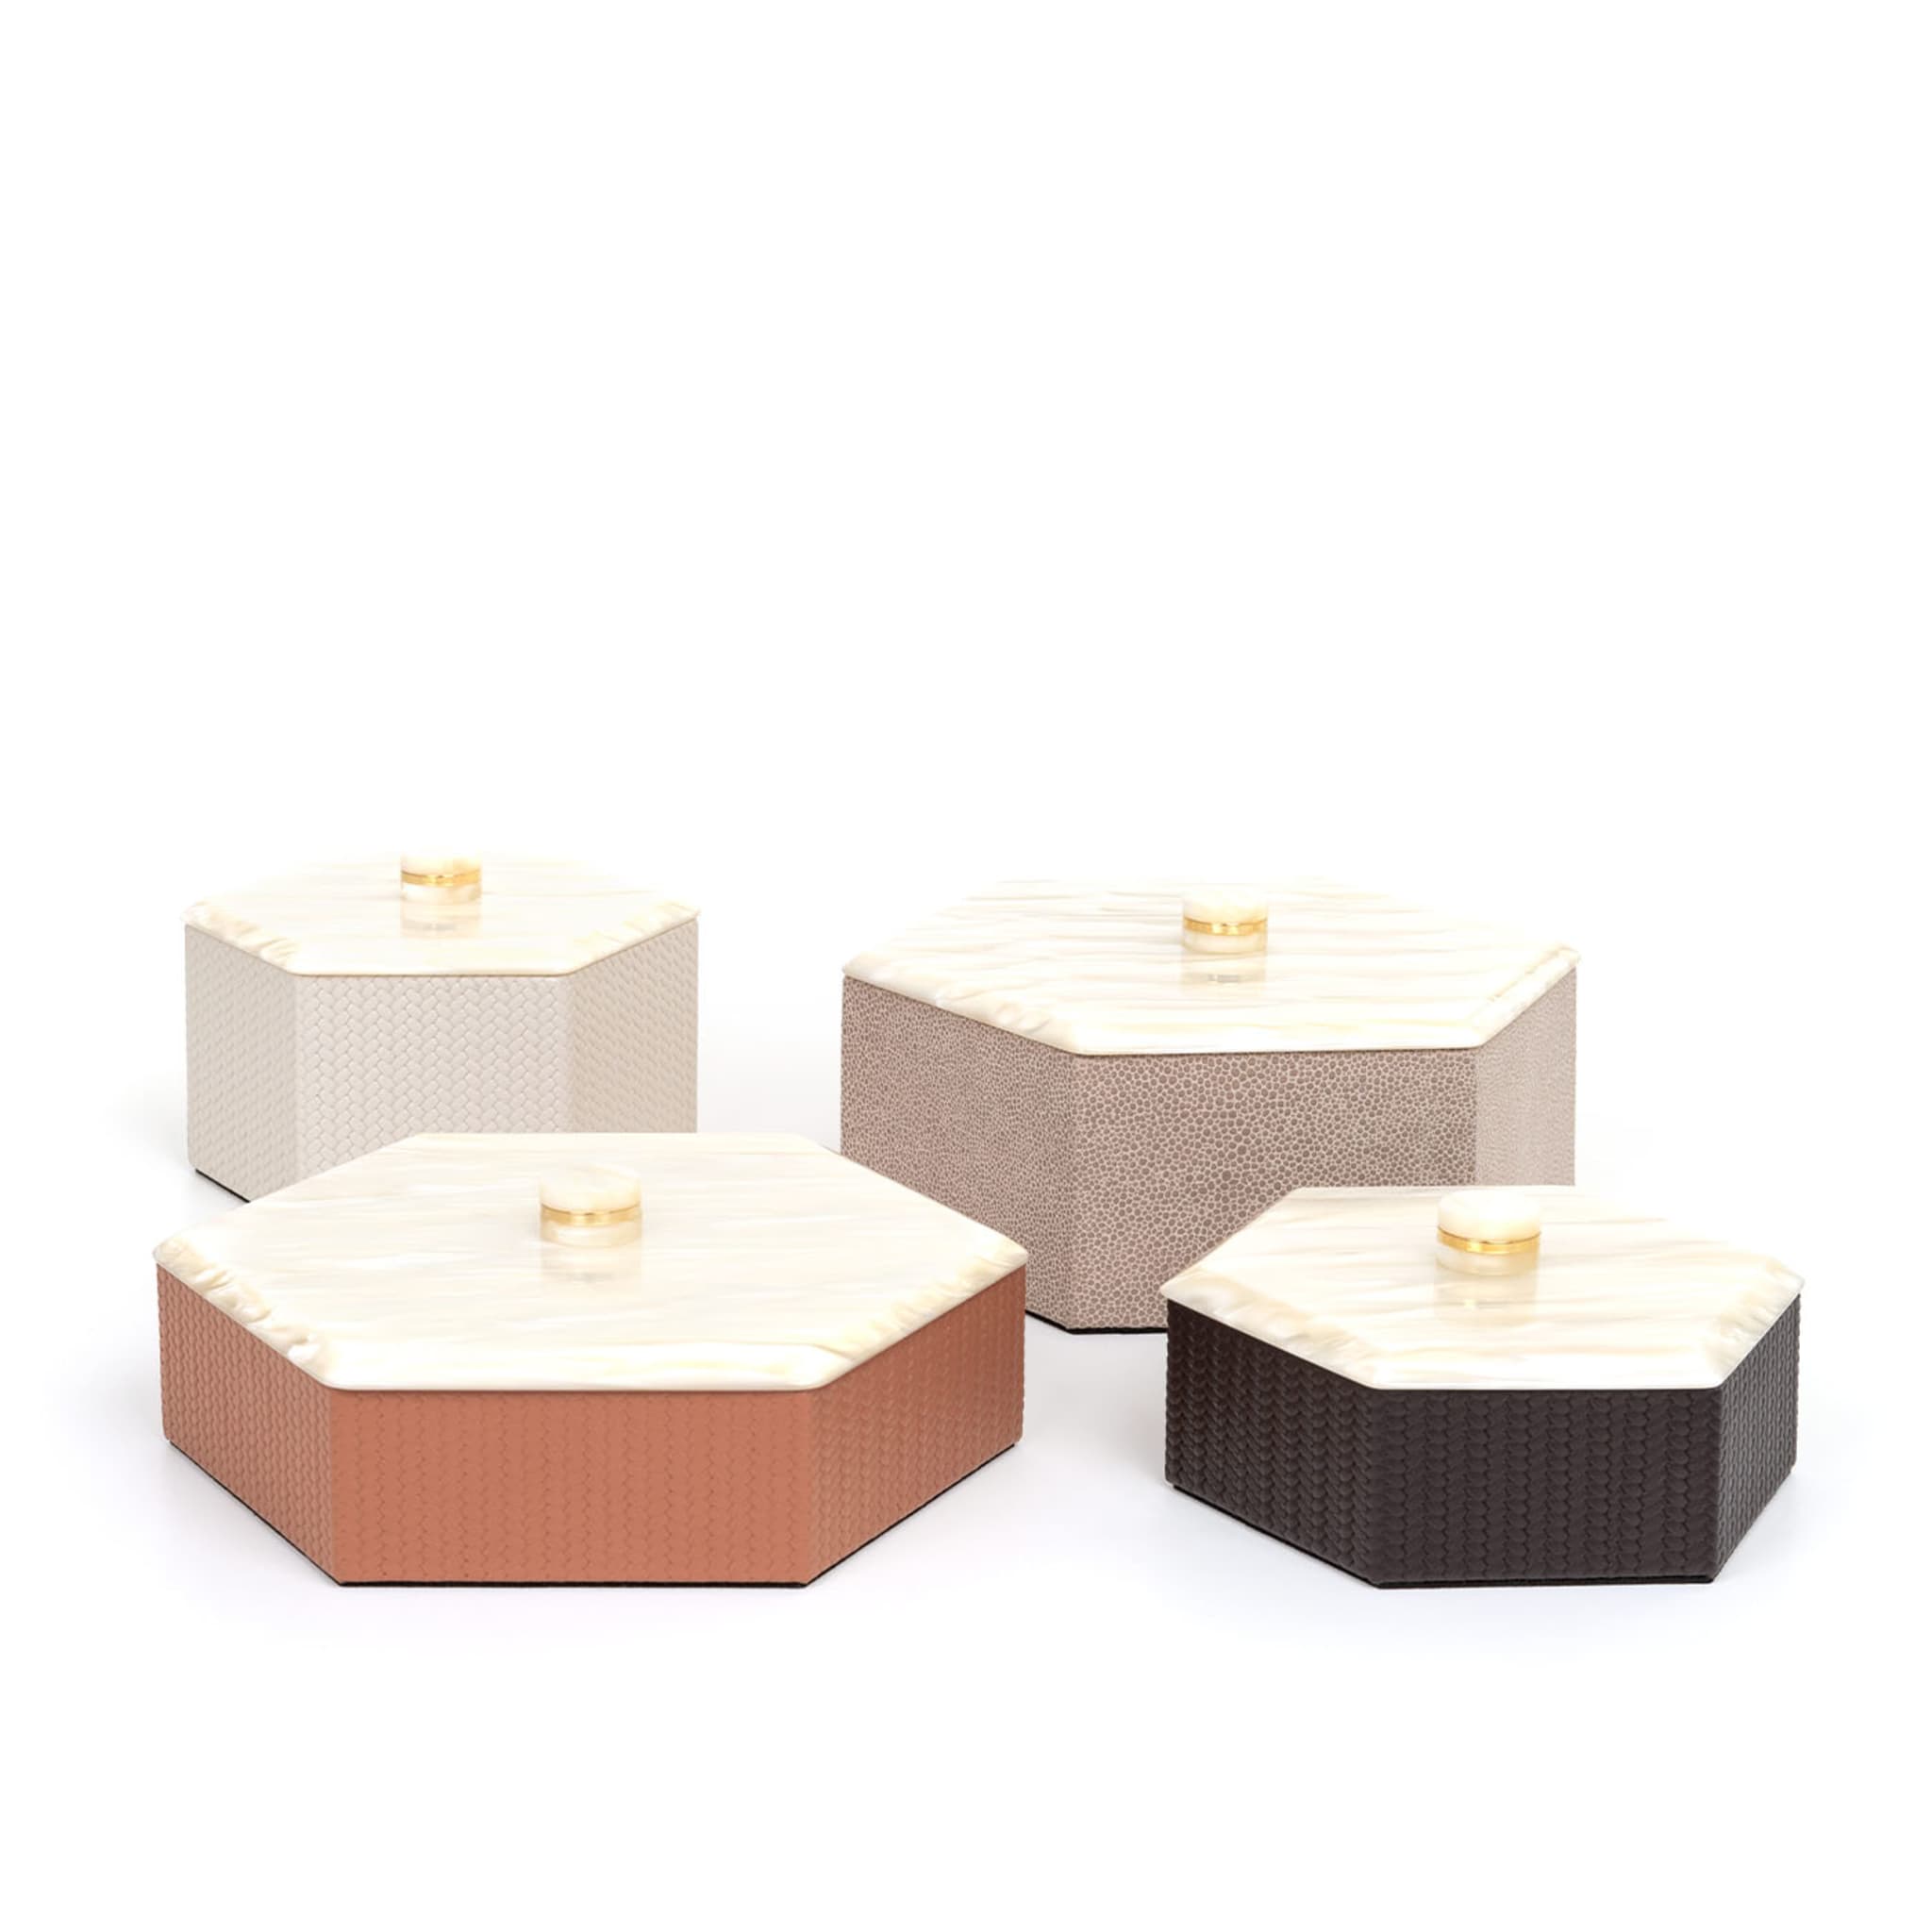 Kelly Low Small Hexagonal-Cut Brown Box with Lid - Alternative view 1